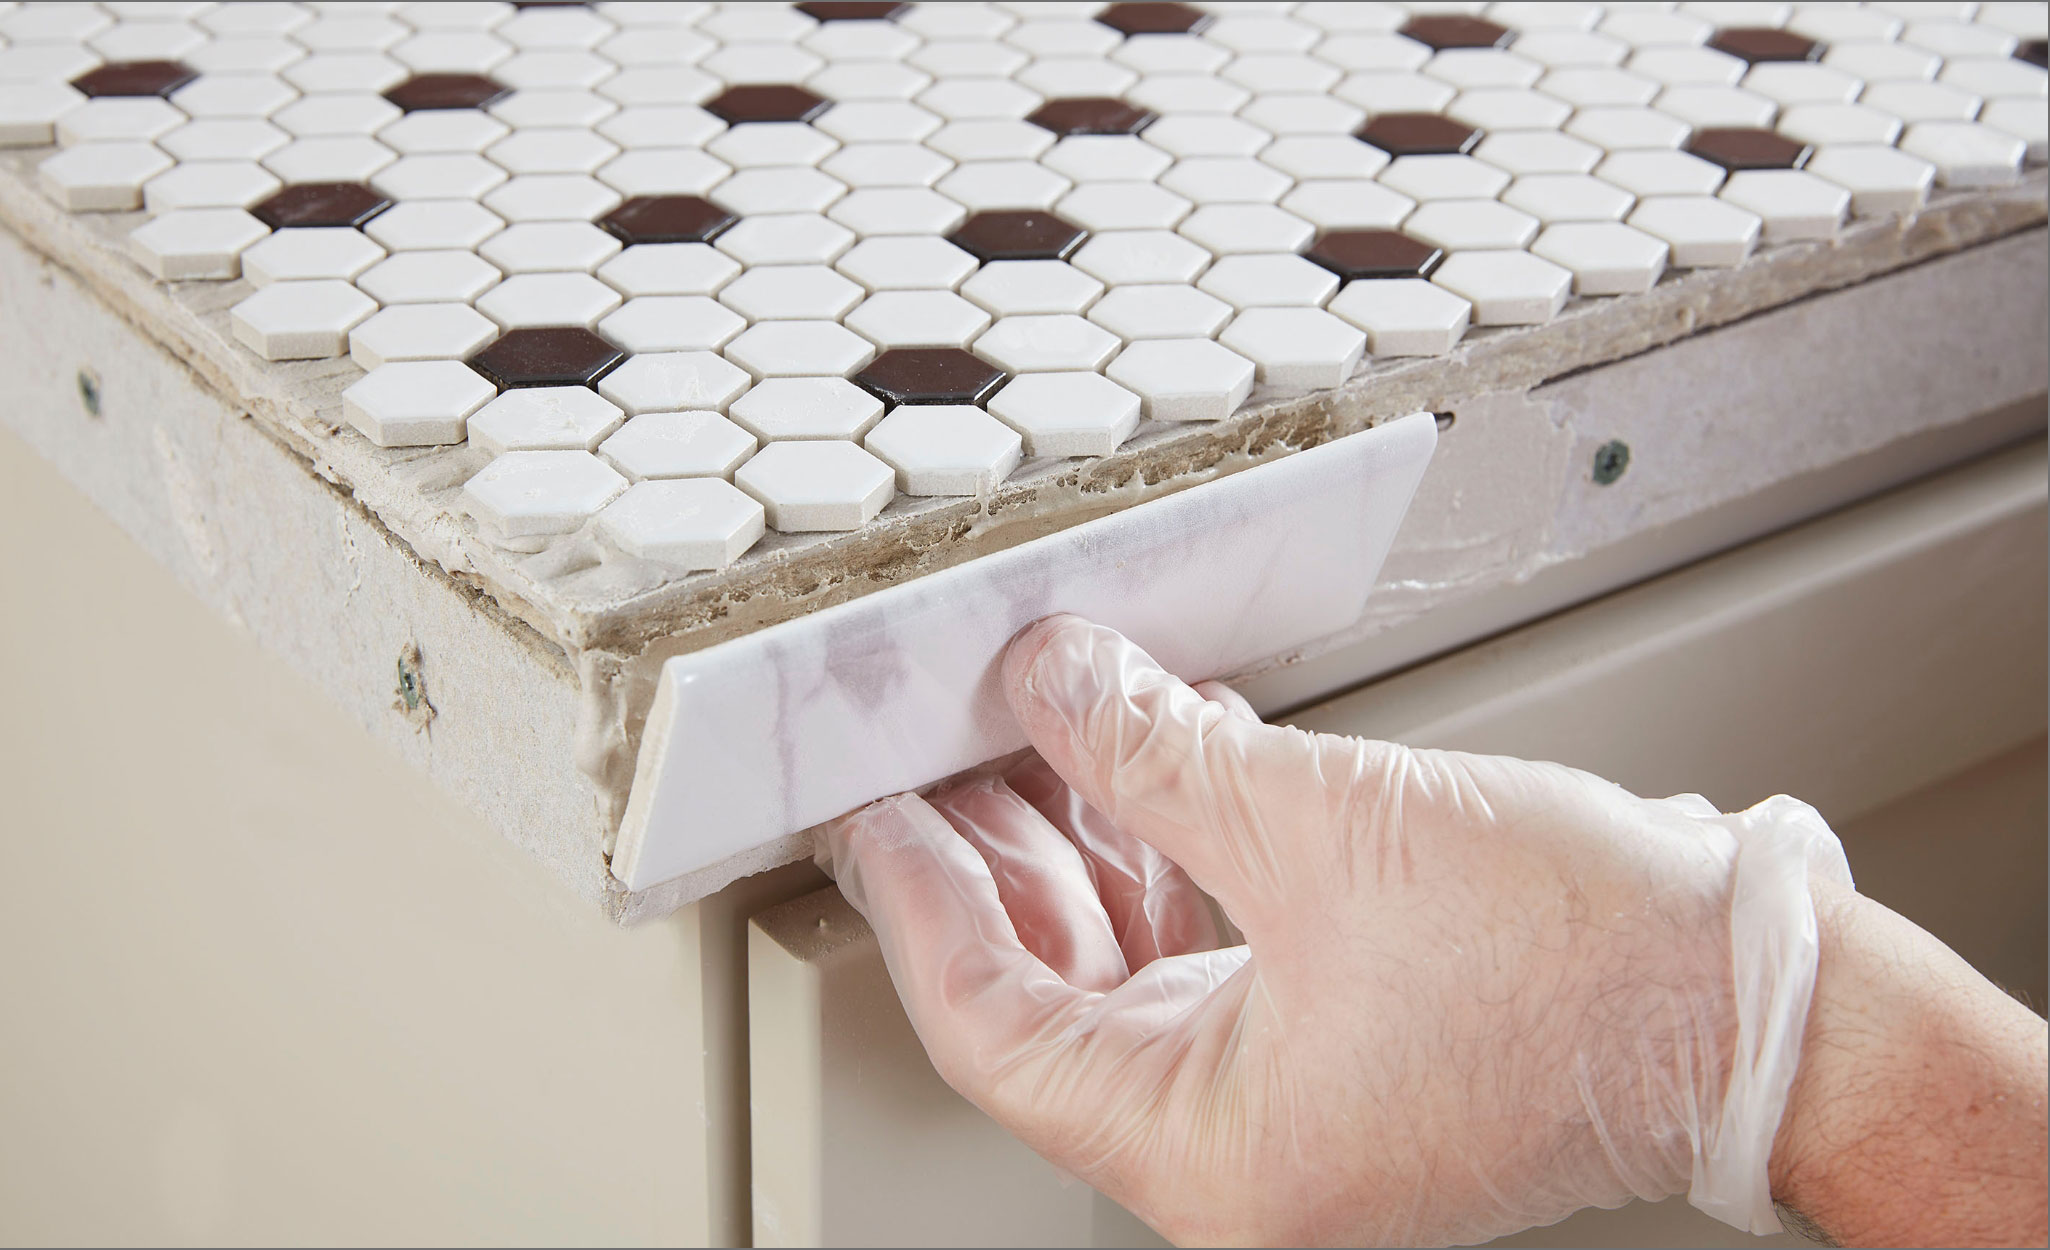 A person applies bullnose tile to the side of a counter.